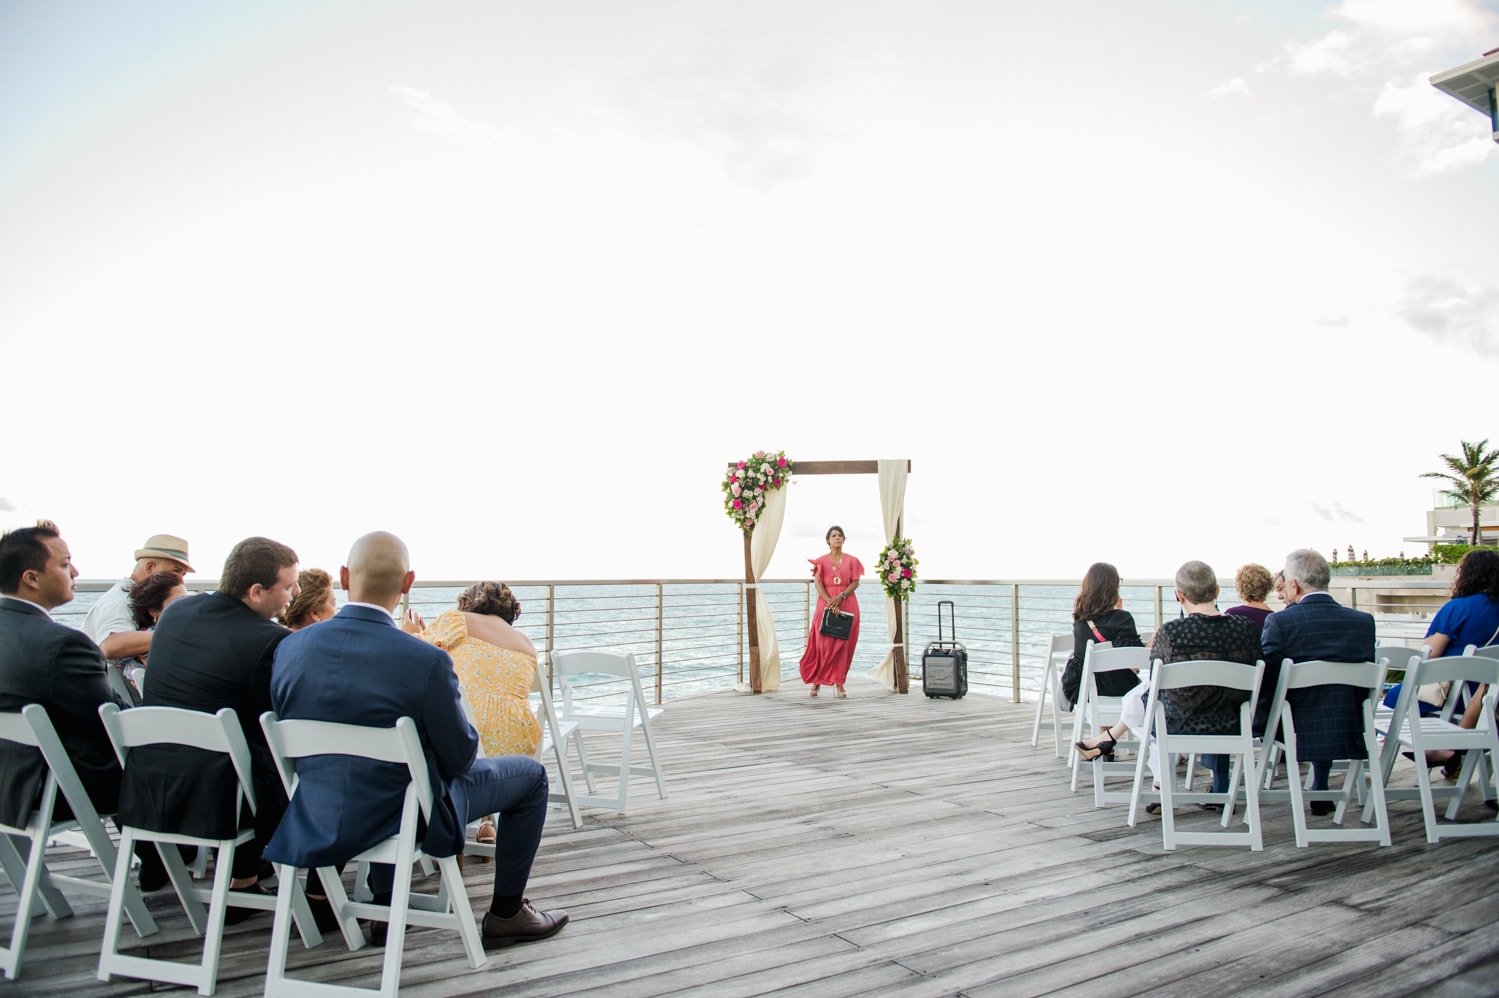 Condado Ocean Club is a beachfront destination wedding venue located in San Juan, PR. Ideal for small weddings to multi-day events with rehearsal dinners.